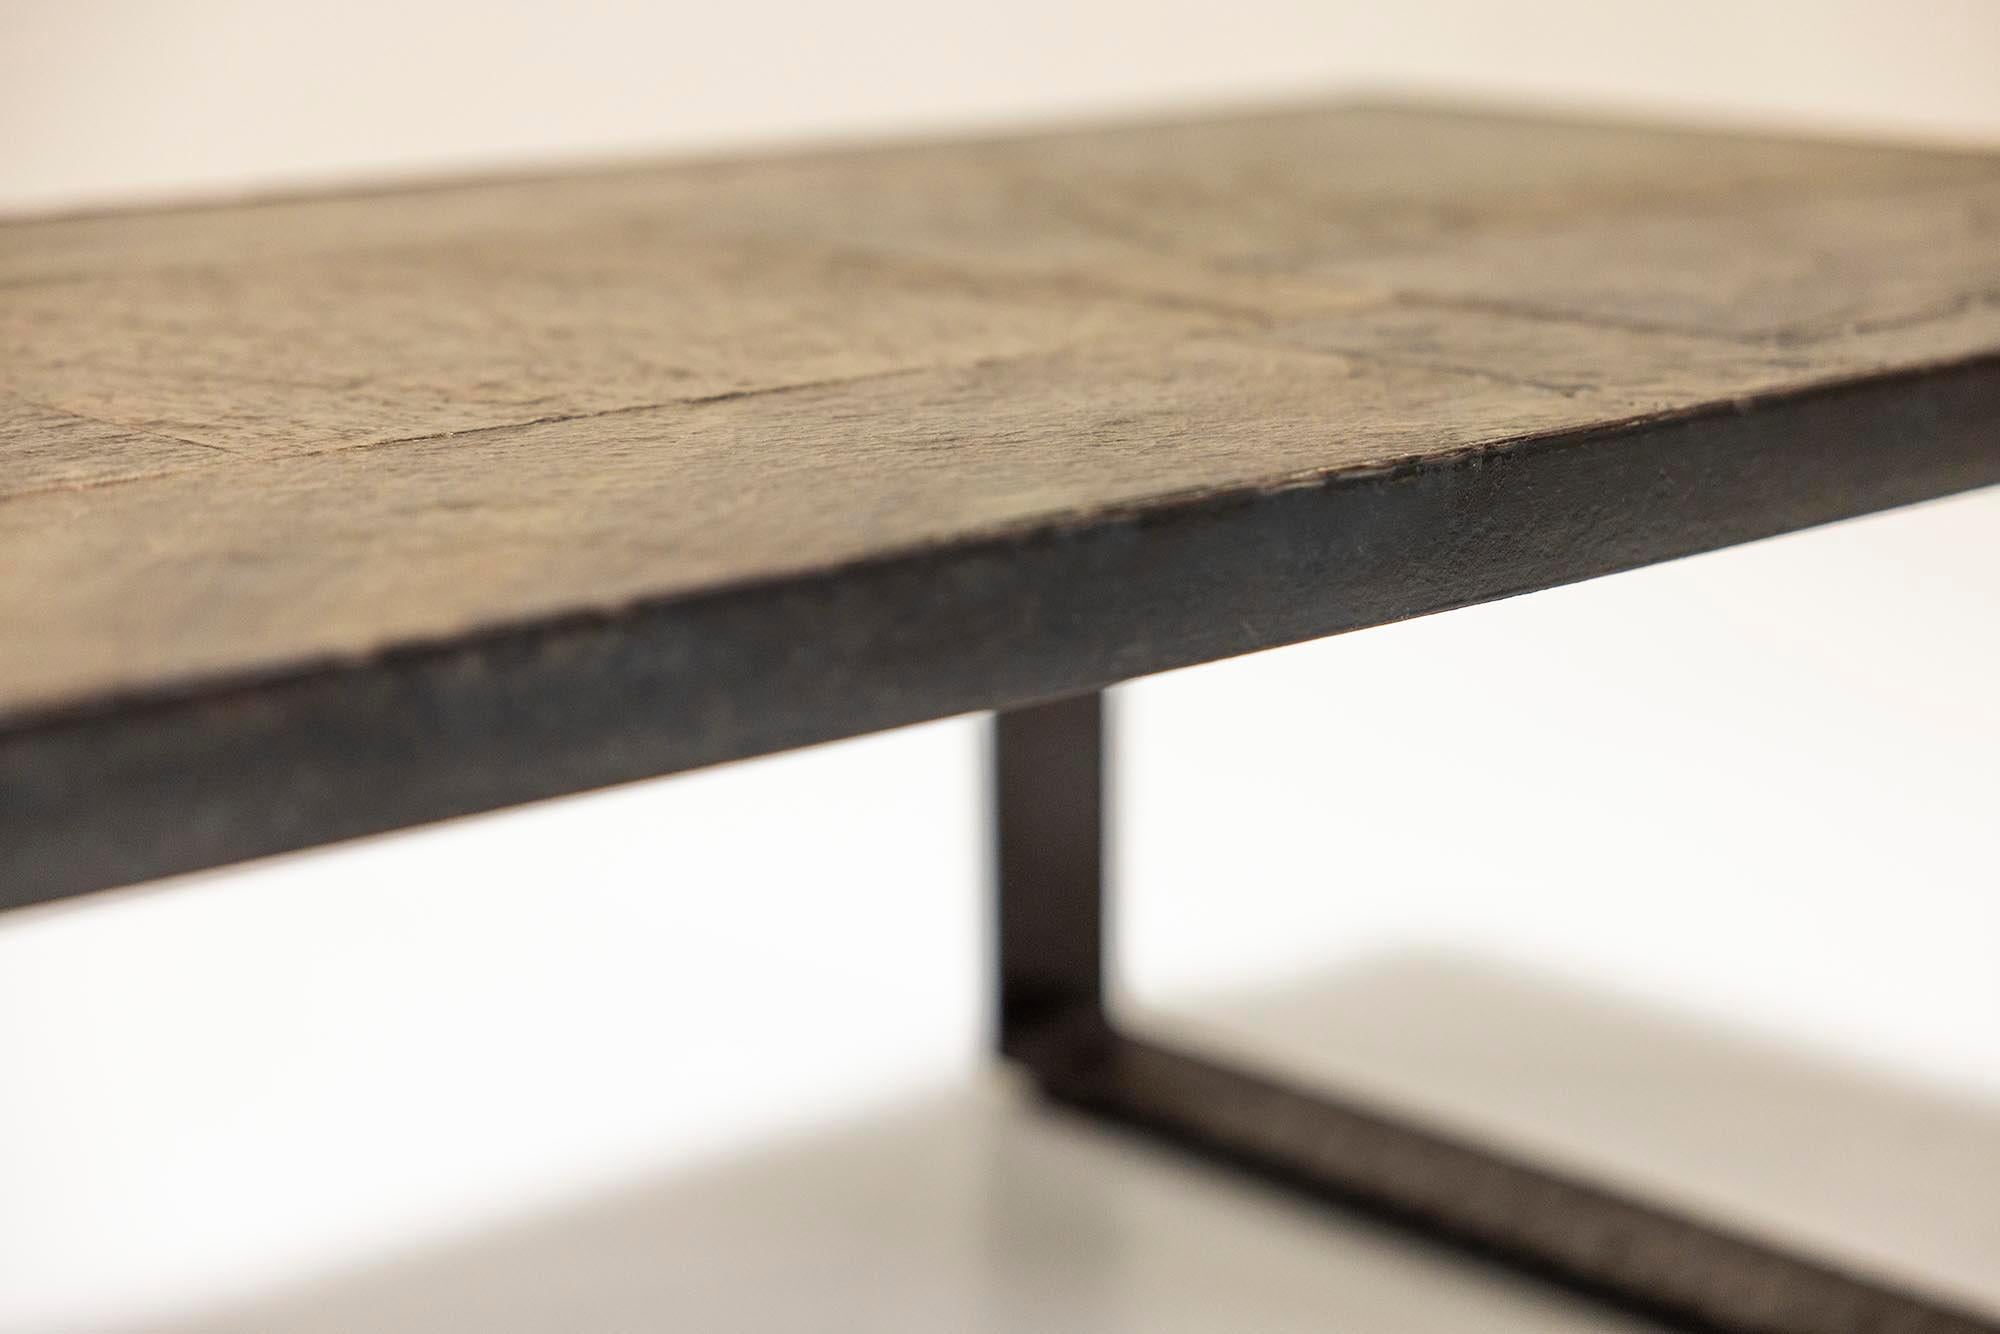 Paul Kingma Brutalist Coffee Table In Stone And Hammered Metal, Netherlands 1960 For Sale 4